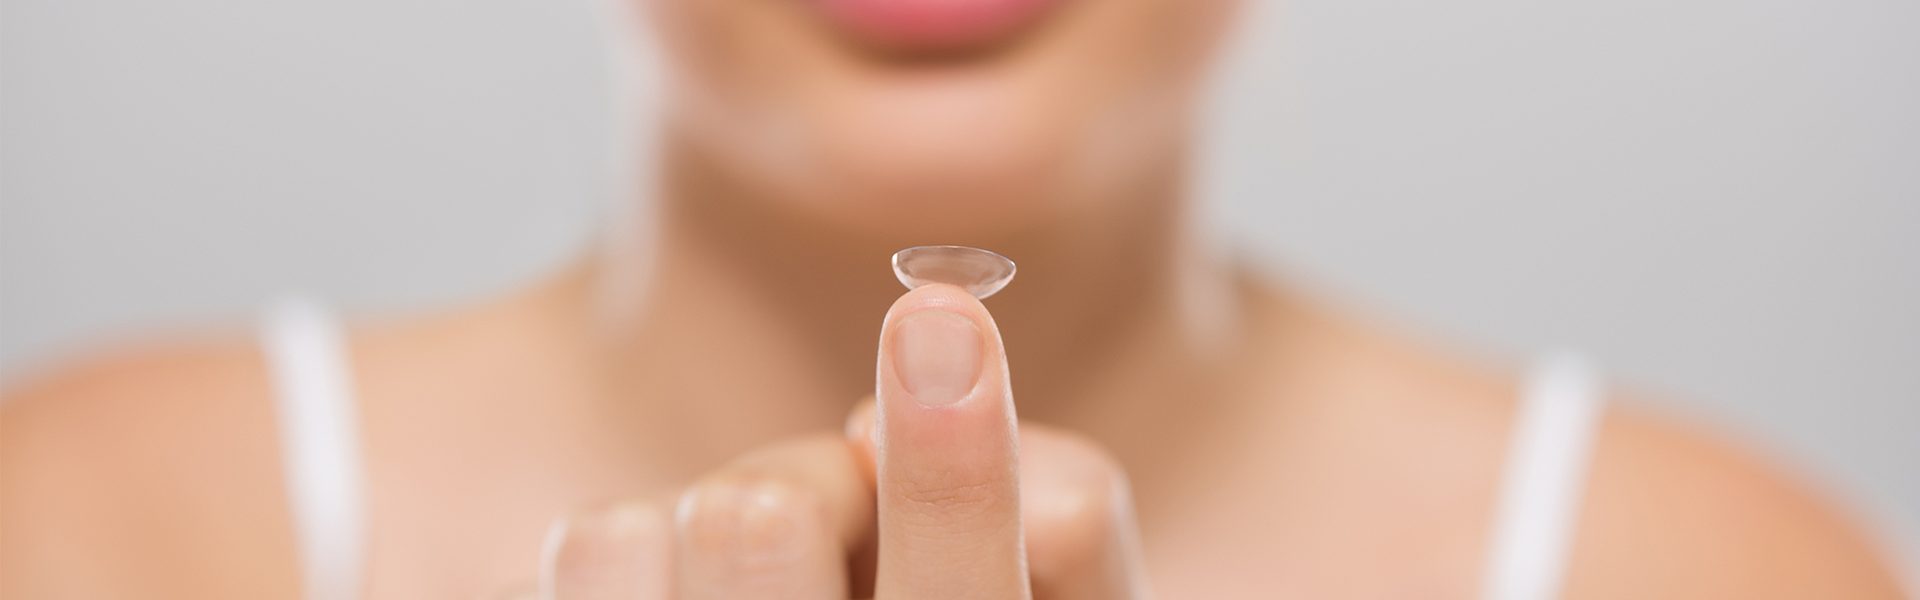 Eye Exam vs Contact Lens Exam: What’s the Difference?